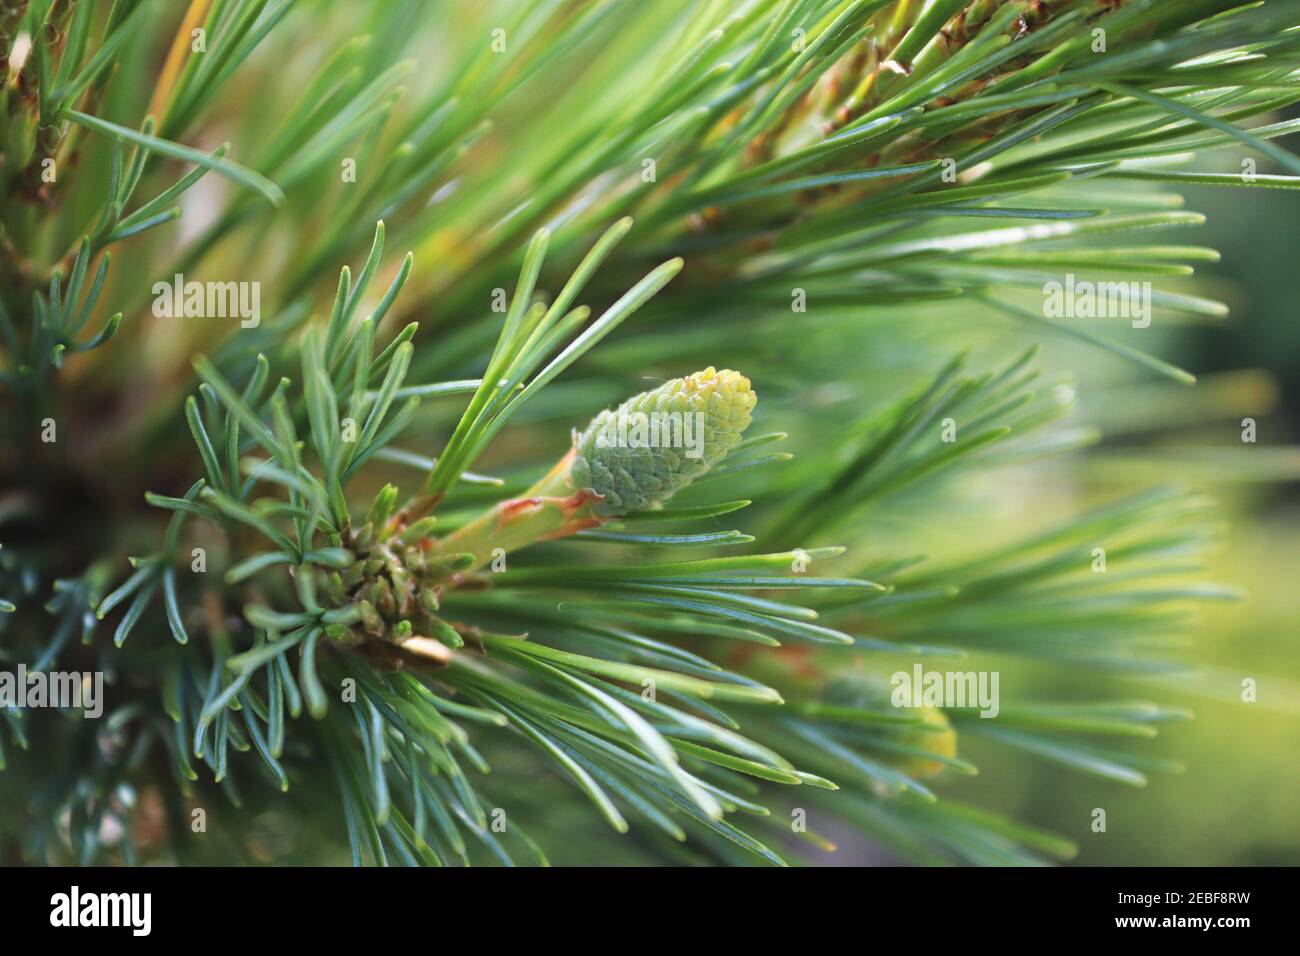 Background of a pine cone forming between long needles Stock Photo